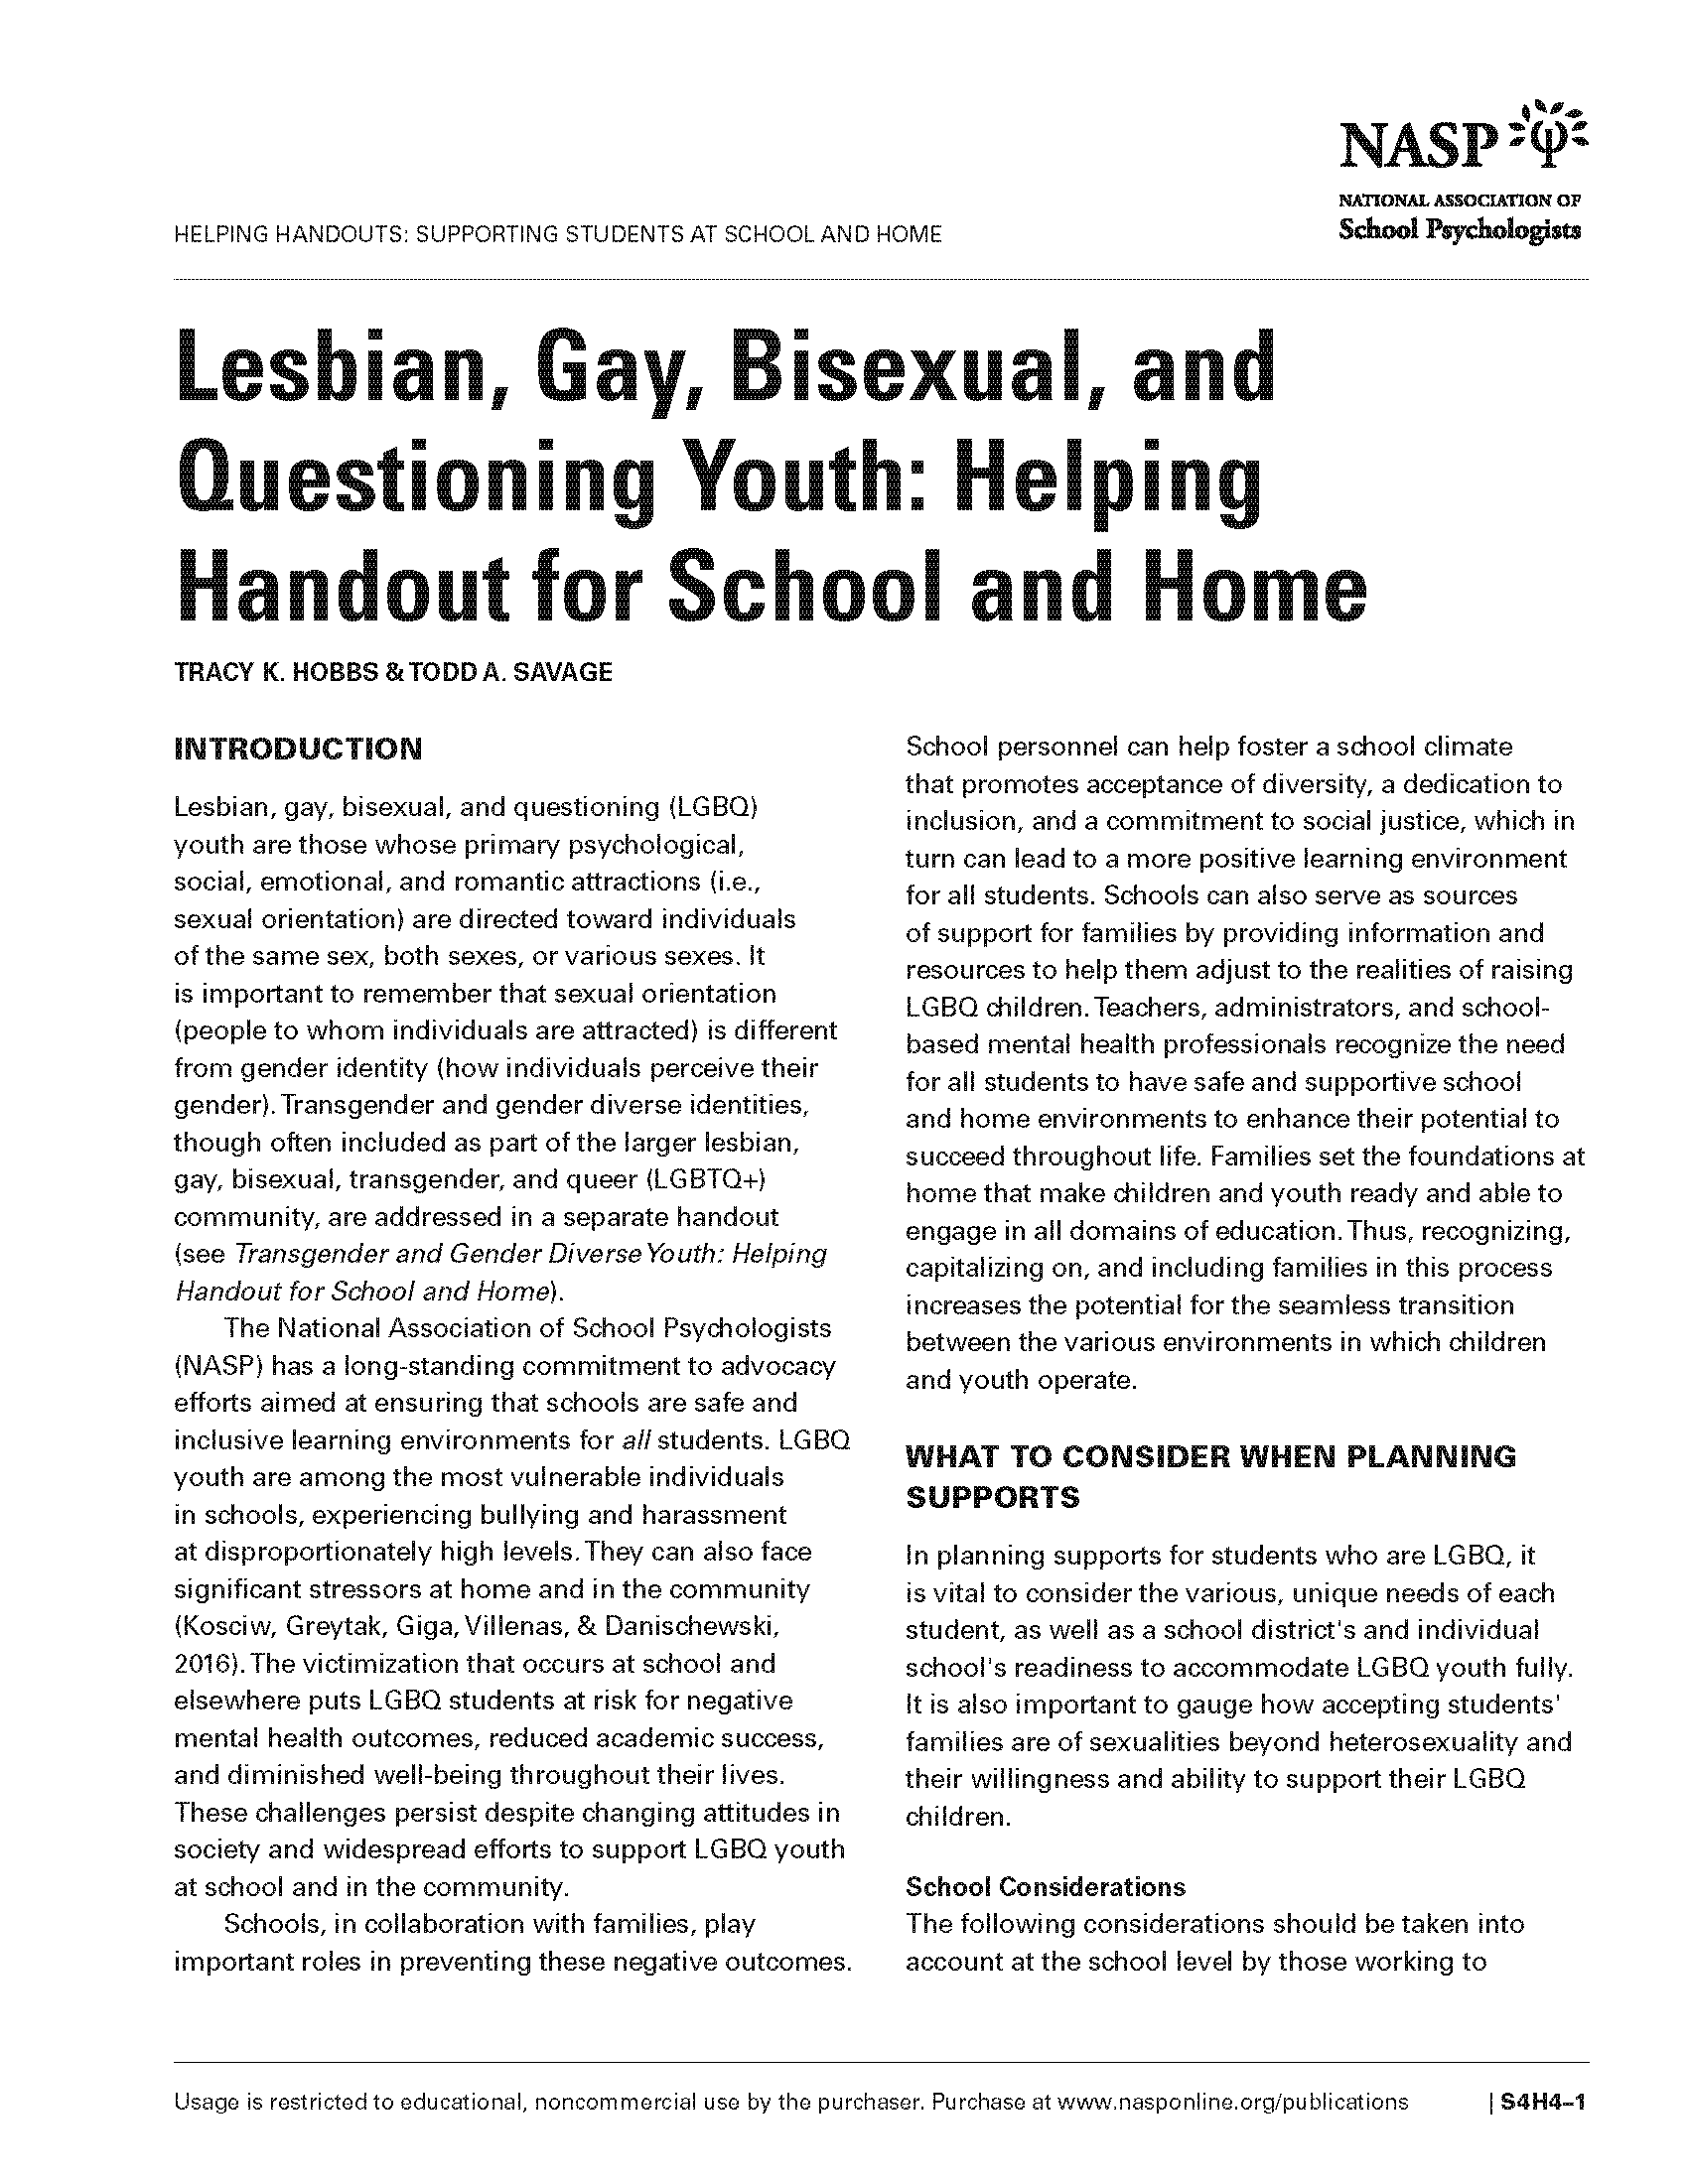 Lesbian, Gay, Bisexual, and Questioning Youth: Helping Handout for School and Home